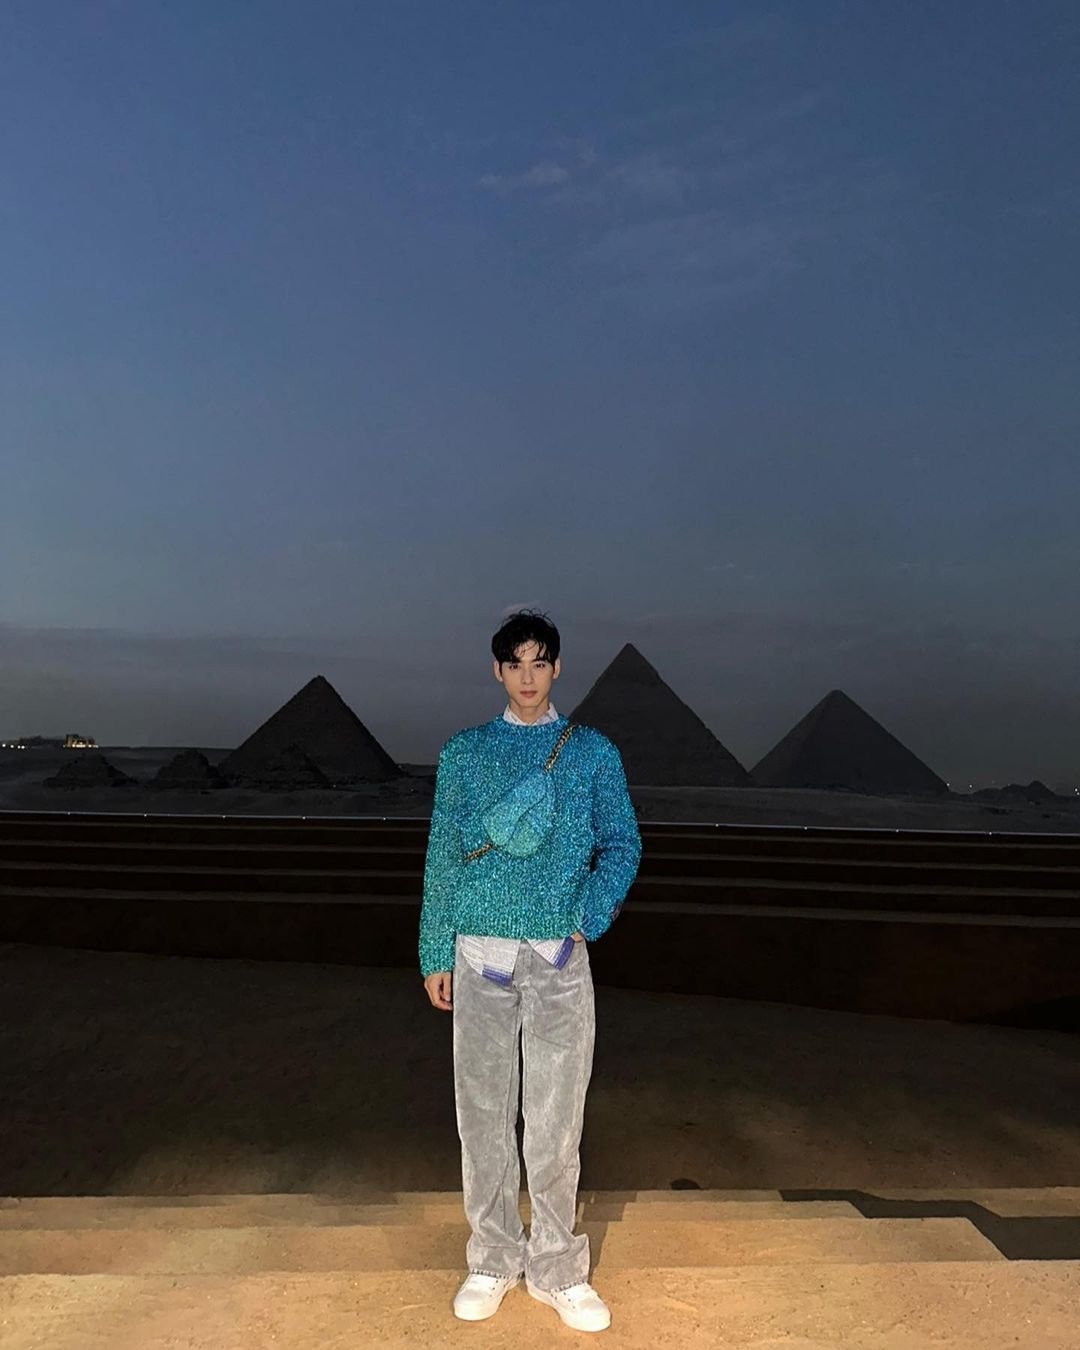 Cha Eun Woo mesmerizes fans & public figures alike in Cairo's airport on  his way to a DIOR event